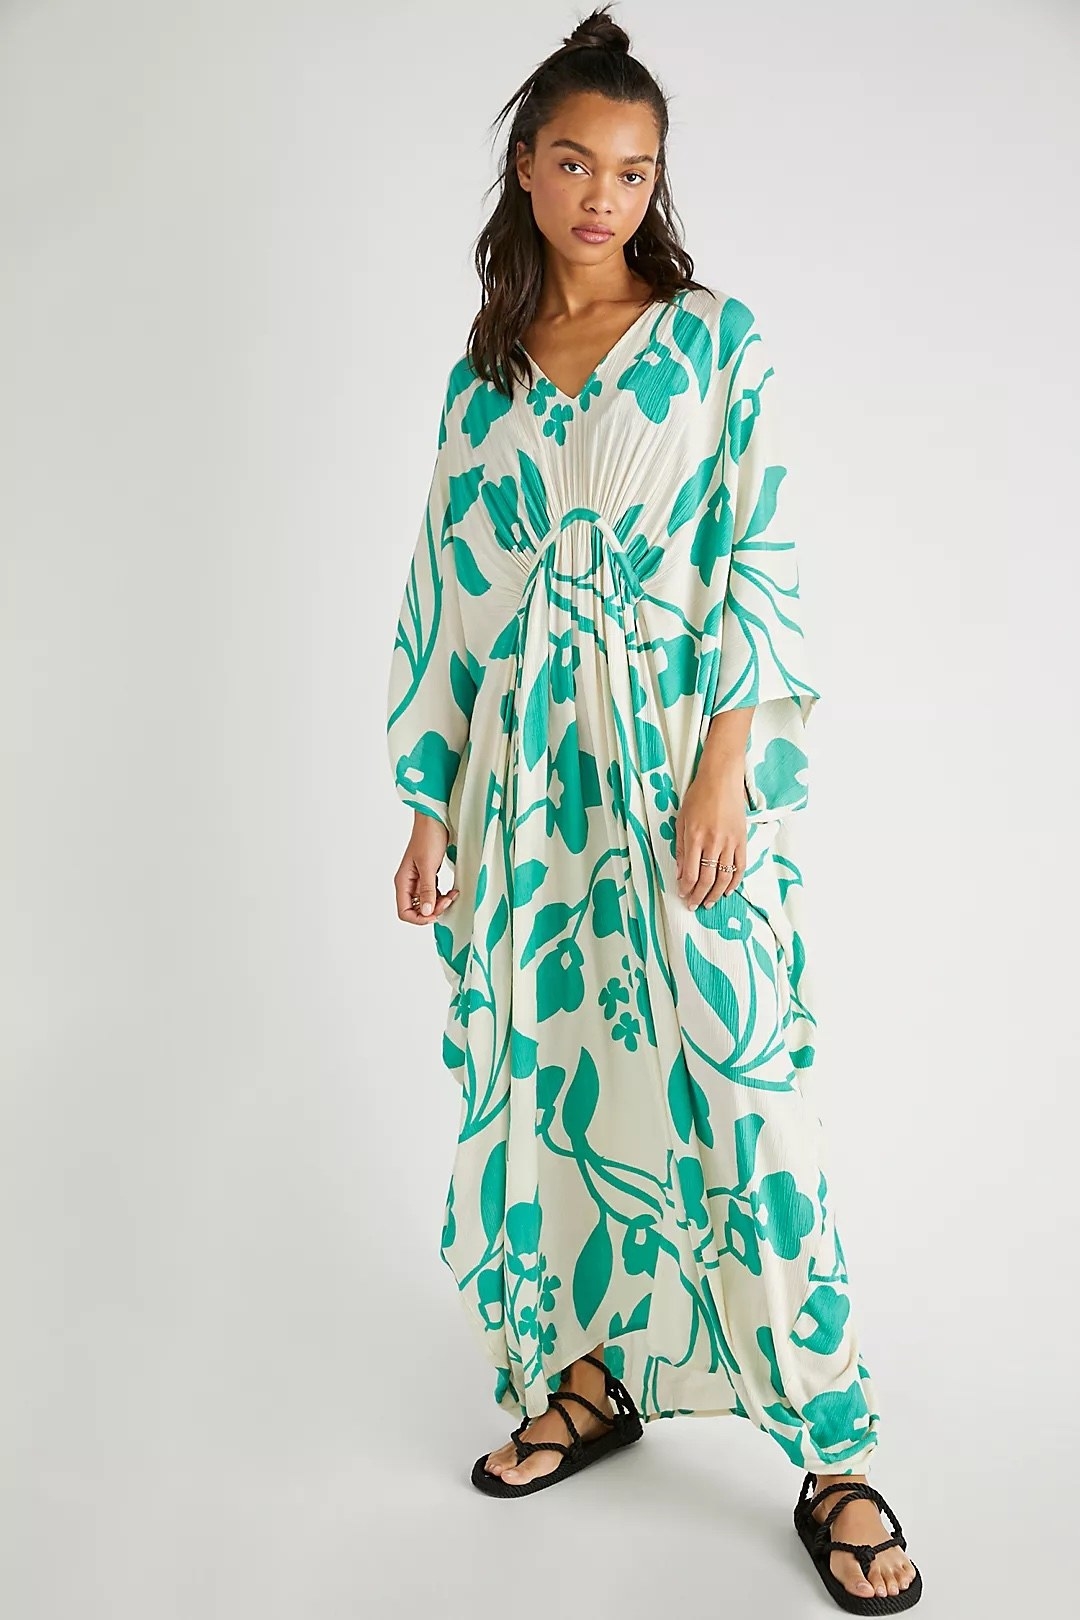 20 Dresses From Free People So Pretty I Just Had To Tell You About Them